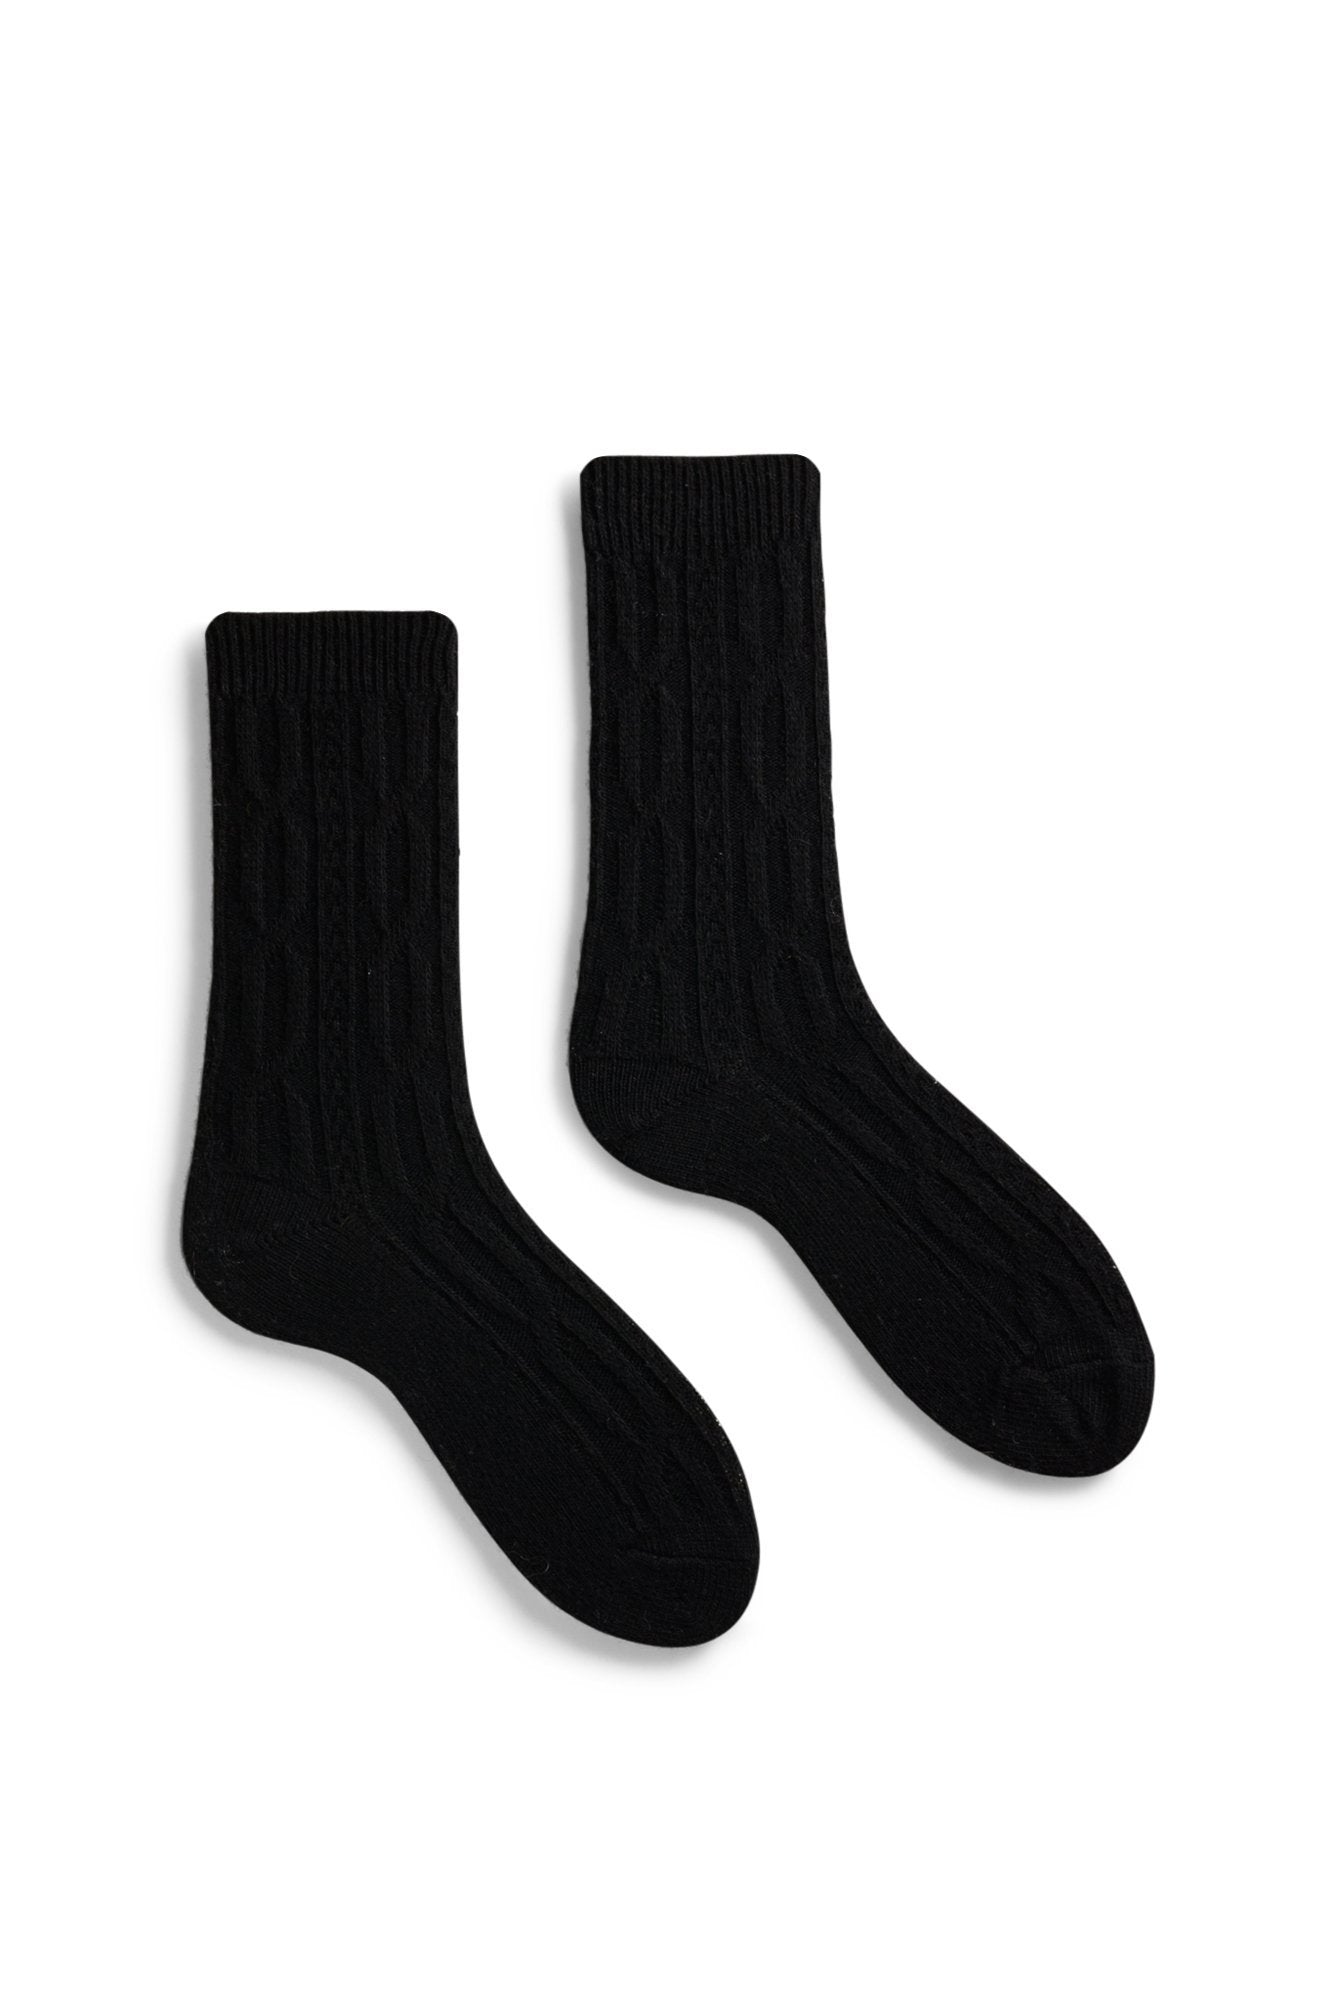 cable crew sock - assorted colors (click on image to see more)